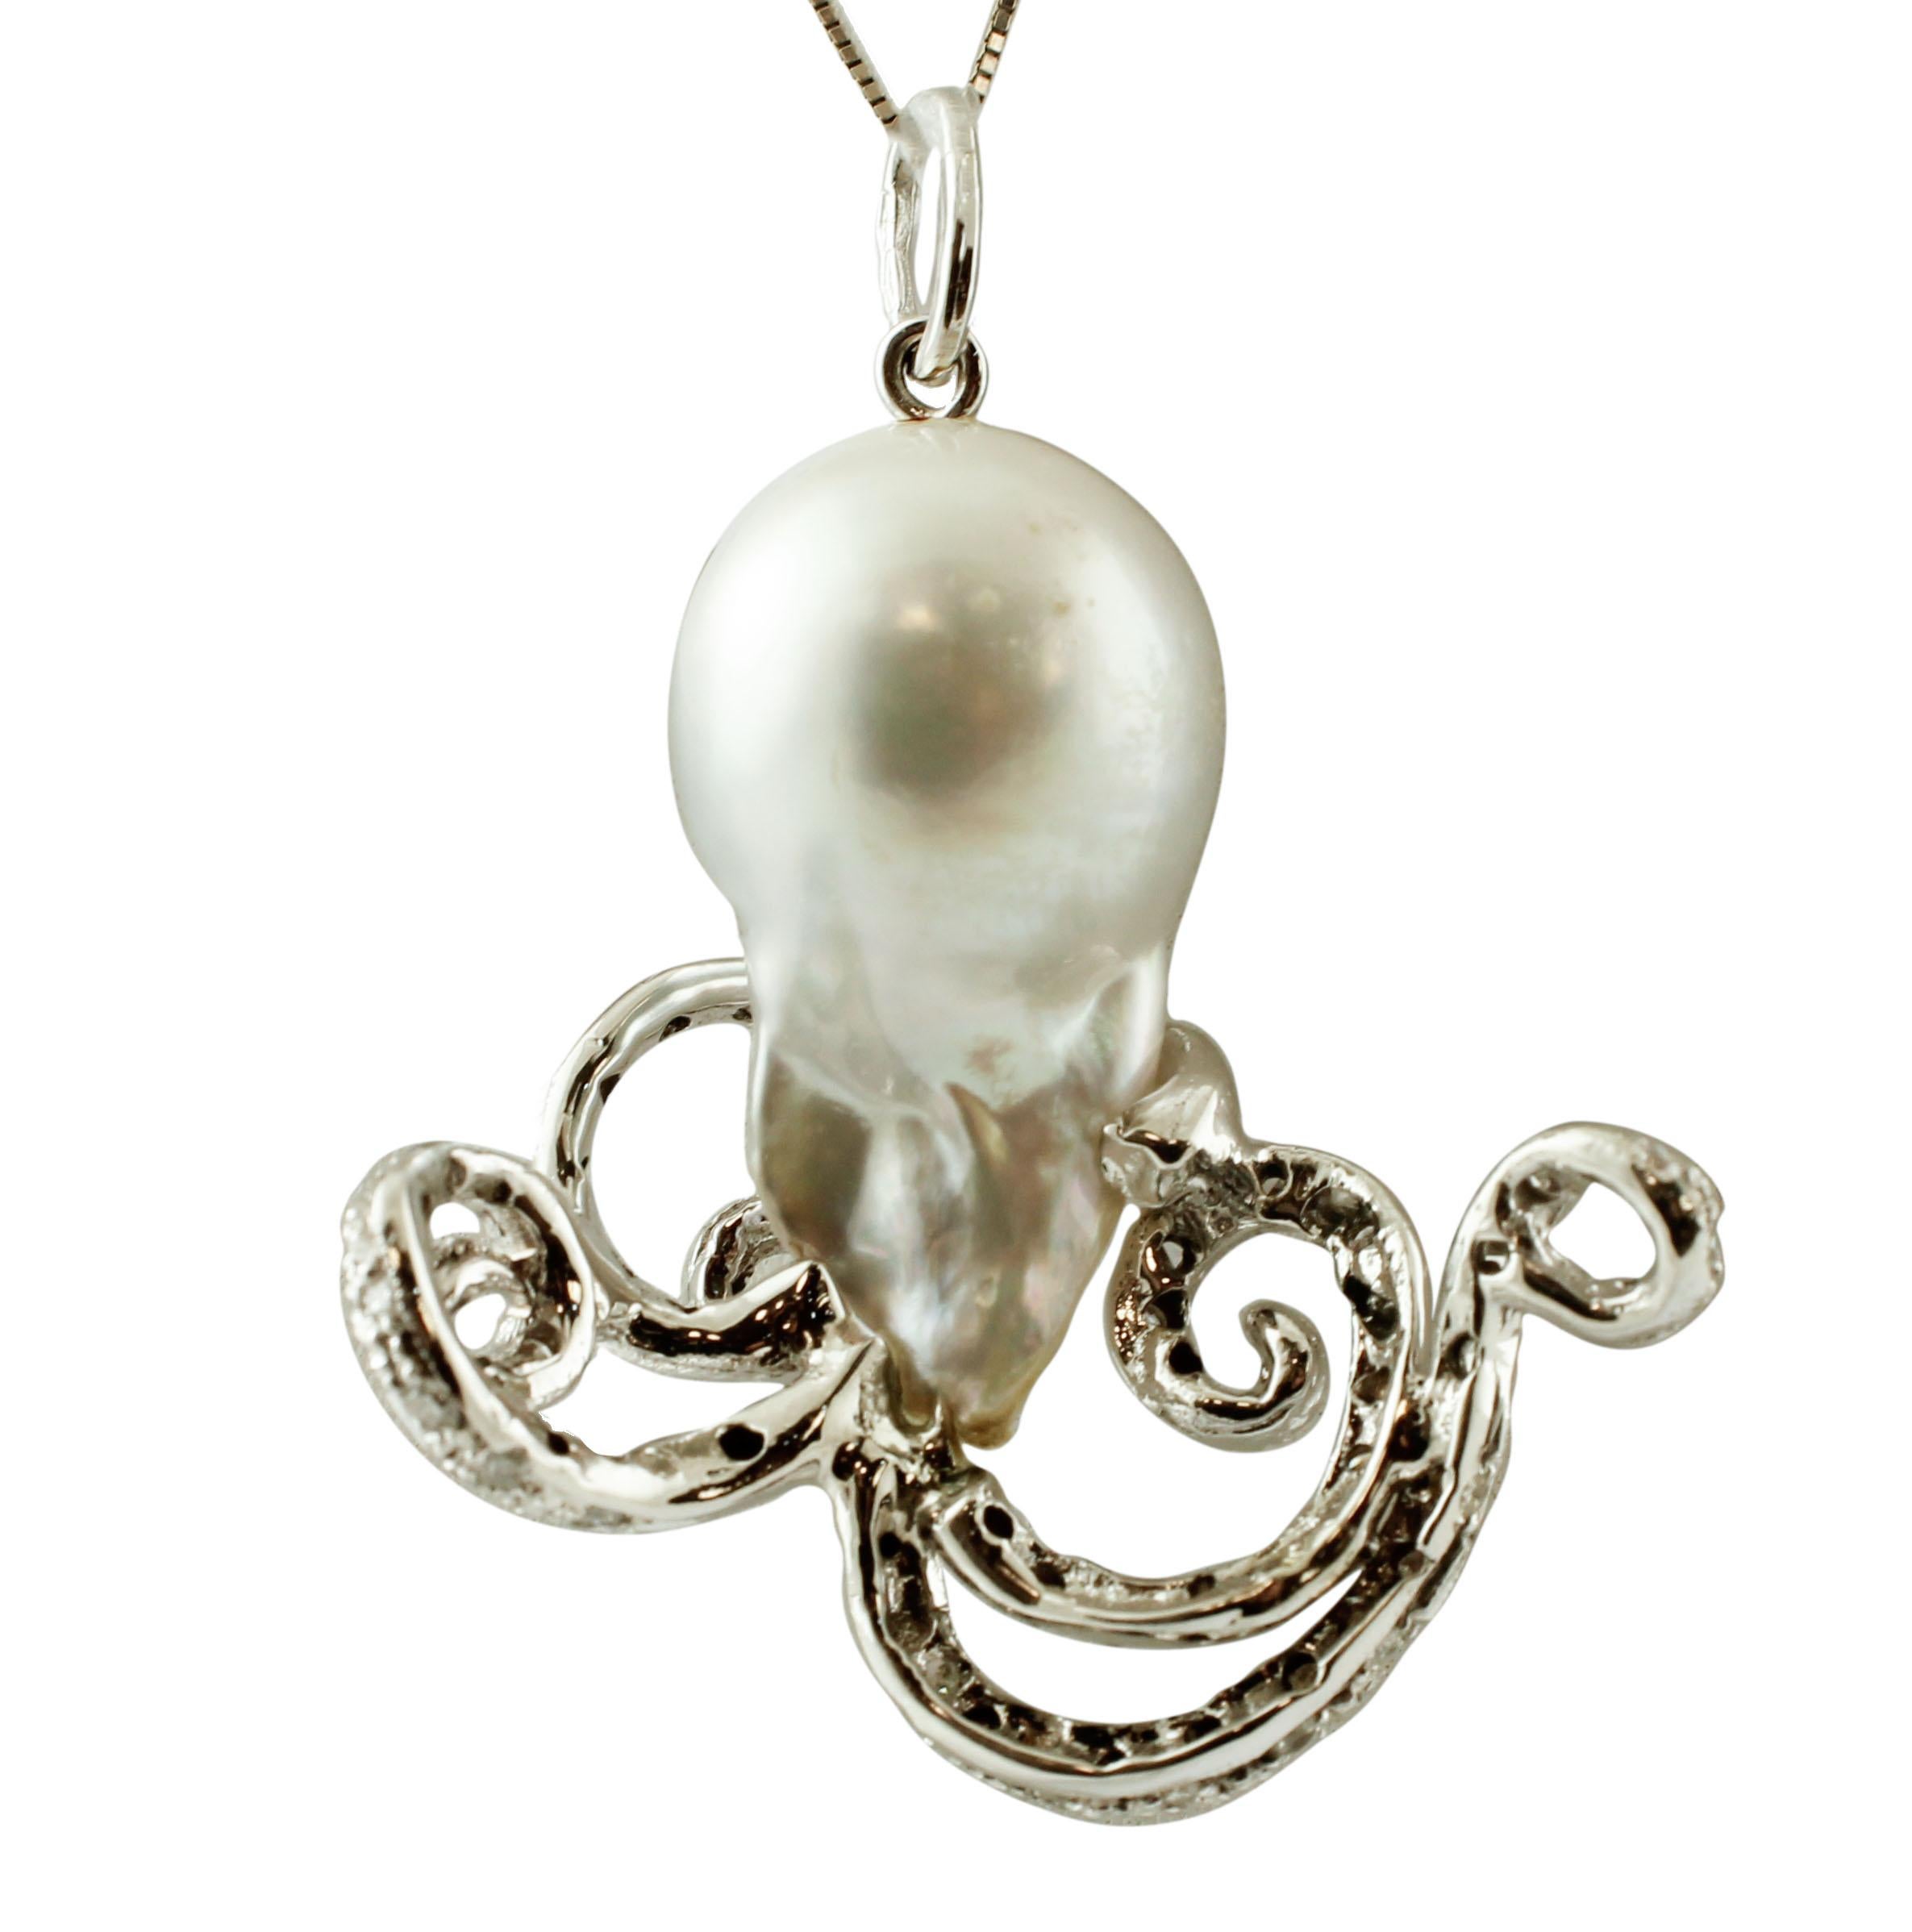 SHIPPING POLICY:
No additional costs will be added to this order.
Shipping costs will be totally covered by the seller (customs duties included).

Octopus pendant realized with baroque pearl and 14k white gold studded with diamonds.
This pendant is